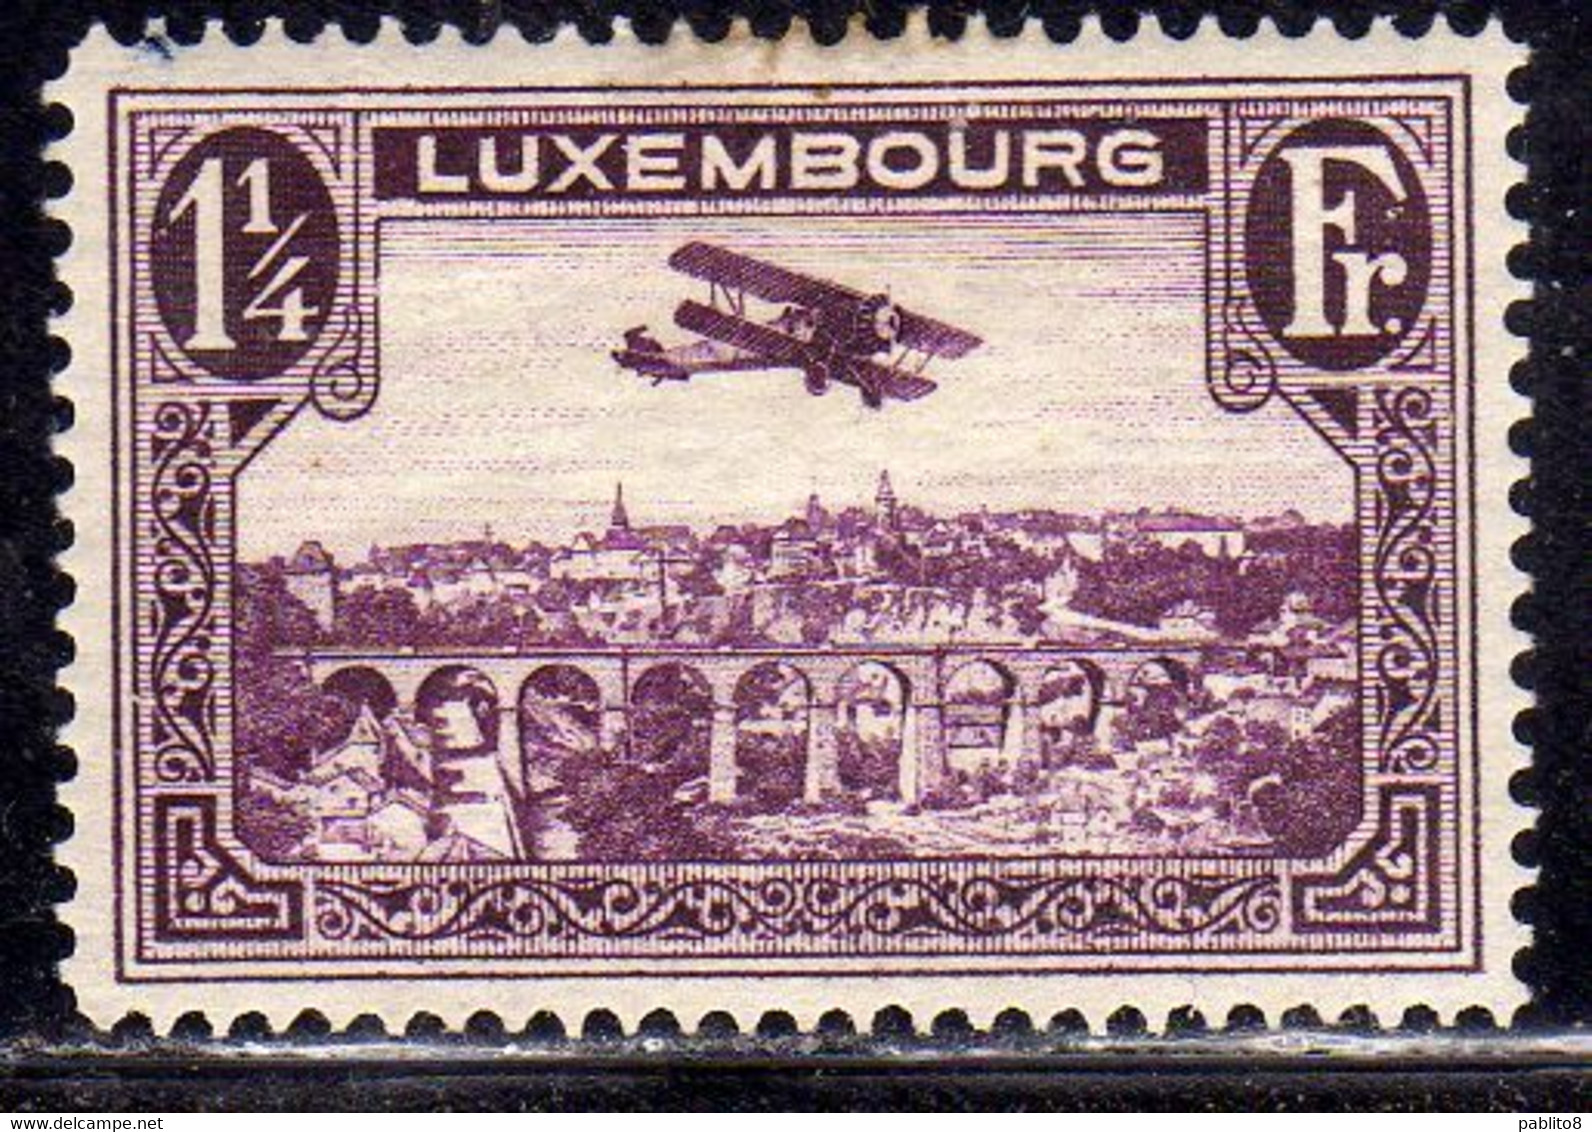 LUXEMBOURG LUSSEMBURGO 1931 1933 AIR POST STAMPS AIRMAIL AIRPLANE OVER POSTA AEREA 1 1/4fr MLH - Ungebraucht